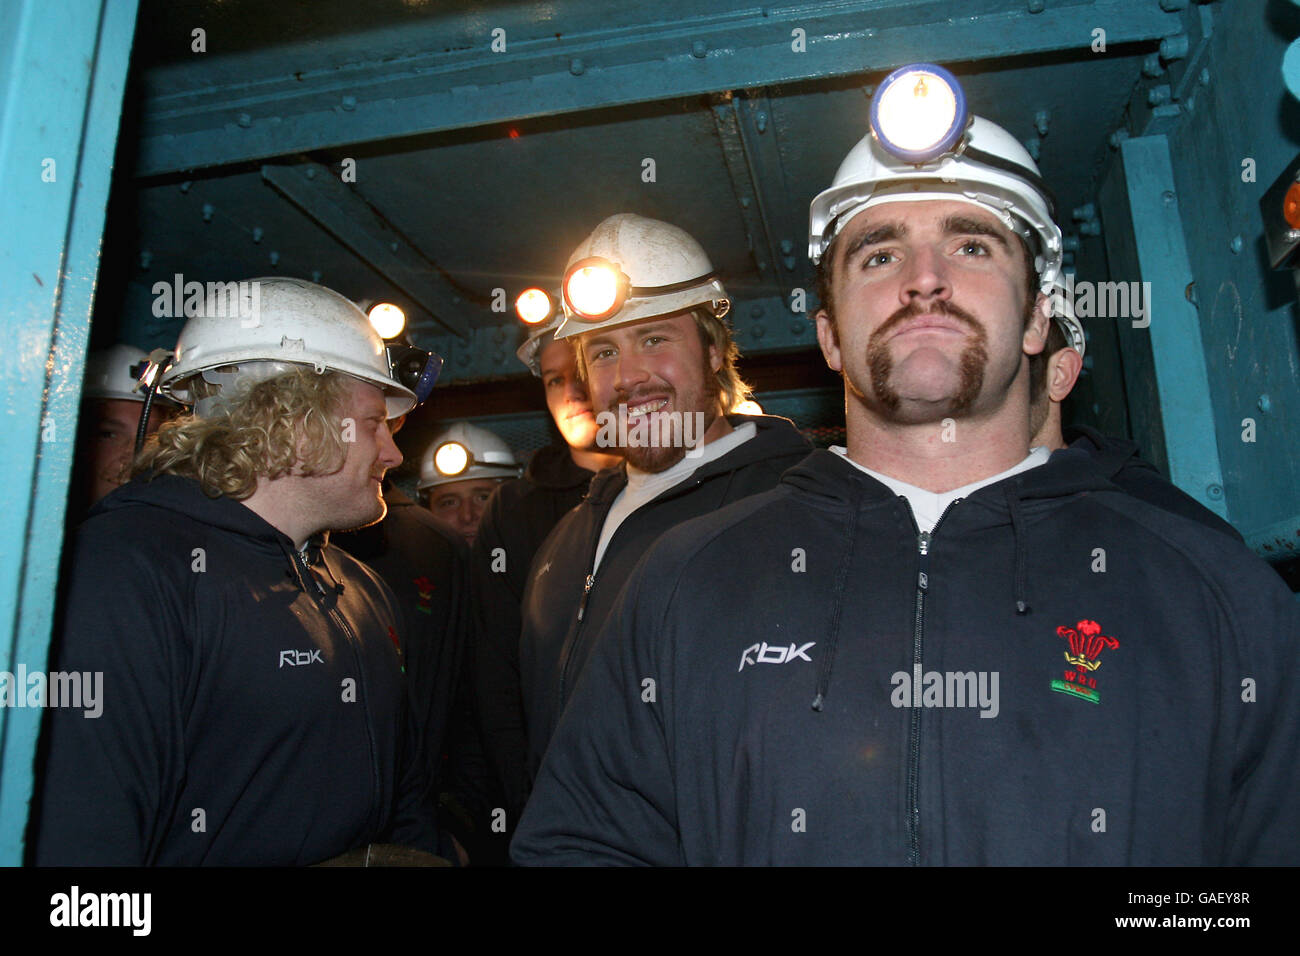 Rugby Union - Galles Foto chiamata - Big Pit National Coal Museum Foto Stock